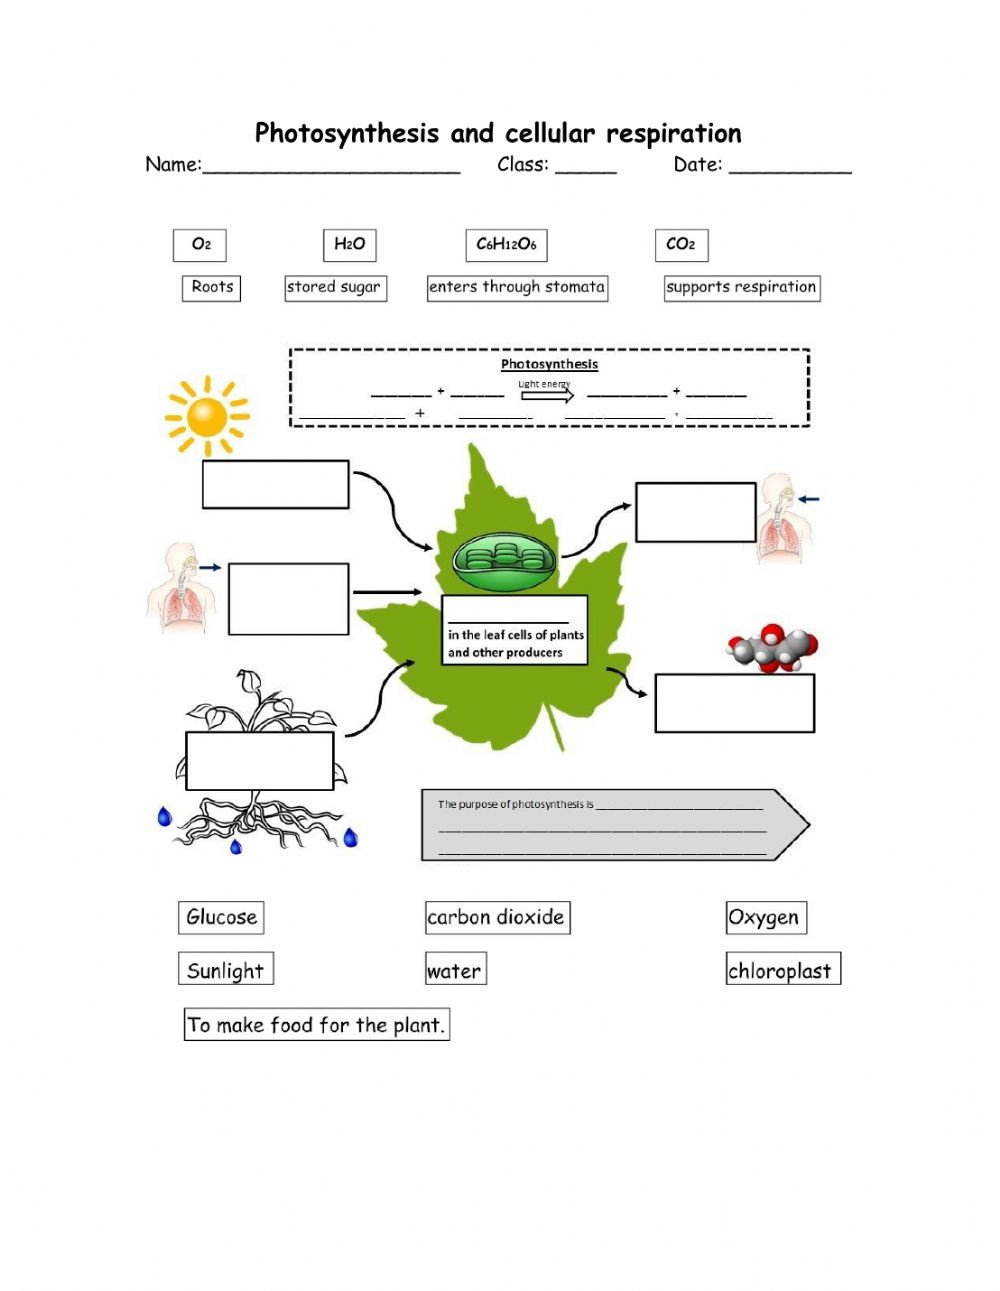 Photosynthesis and Respiration Worksheet Synthesis and Cellular Respiration Interactive Worksheet